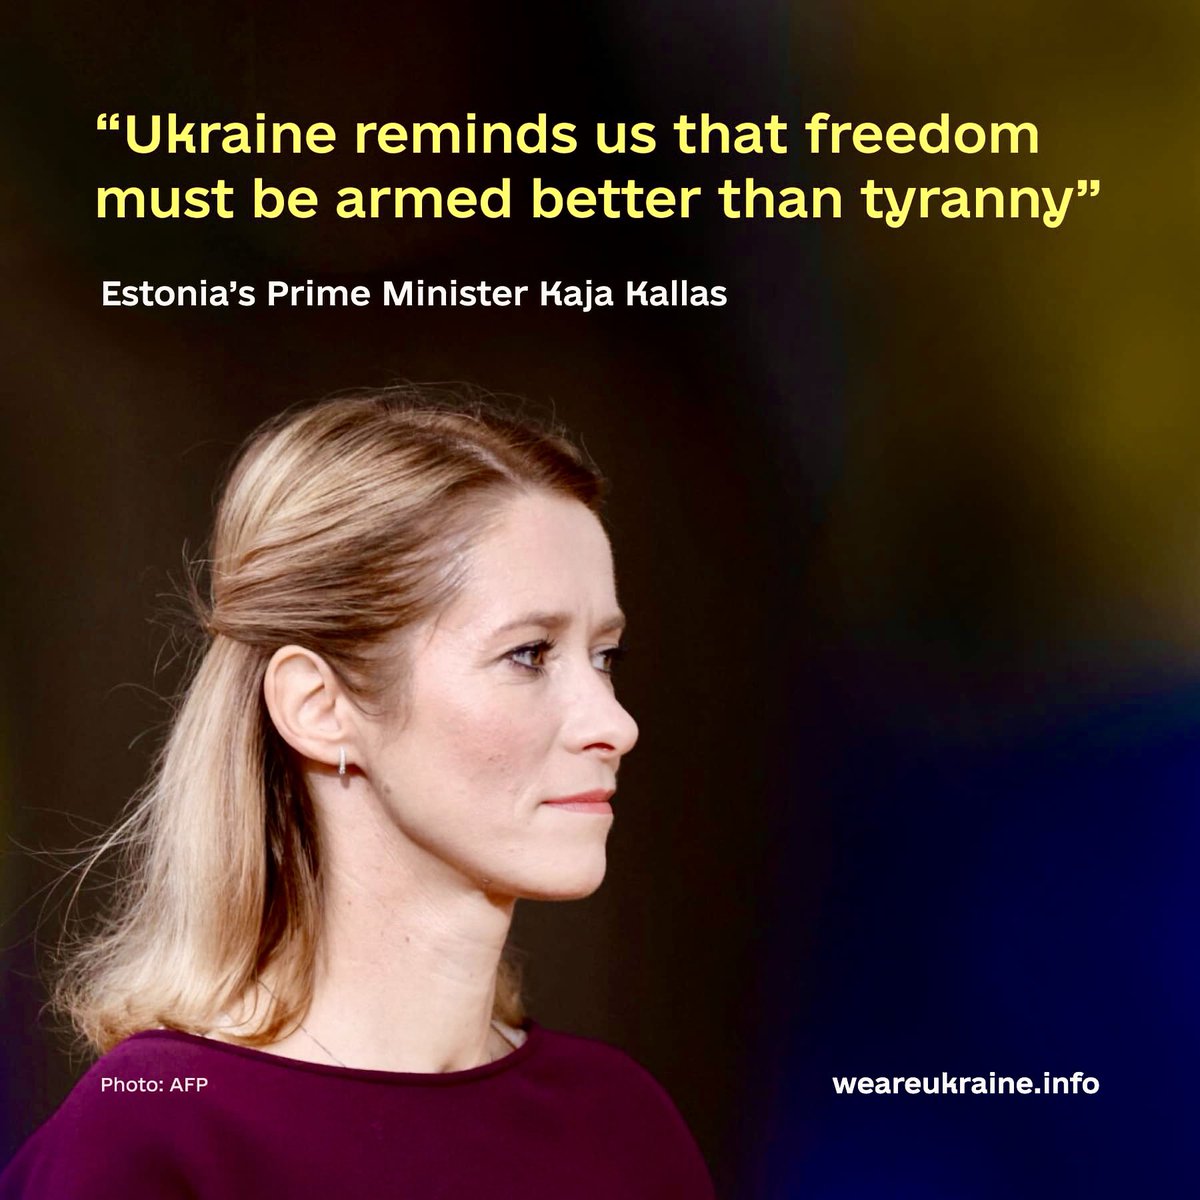 Russia’s #InvasionOfUkraine features everything from traditional military components to economic, informational, religious, & cyber dimensions.

We must unite and defend the great Free Democracies and Republics of the world.  

#FightForFreedom
#FundTheFrontline
#DemVoice1